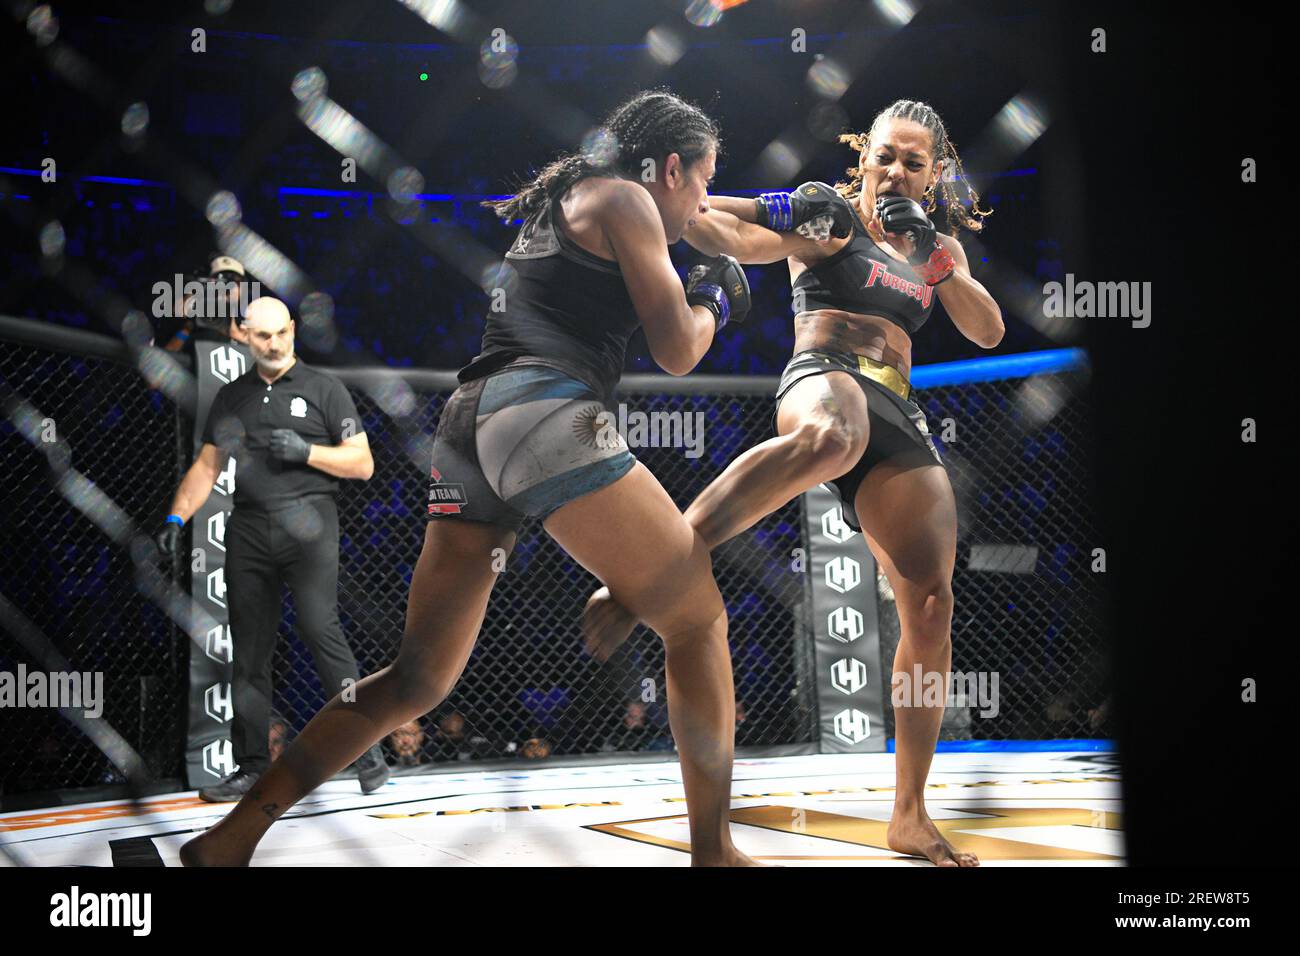 Orange, France. 28th July, 2023. Samantha Jean-François (R) and Laura Balin  (L) in action during their fight on the co-main event of Hexagone MMA 10.  In France, the "Hexagone MMA 10" event